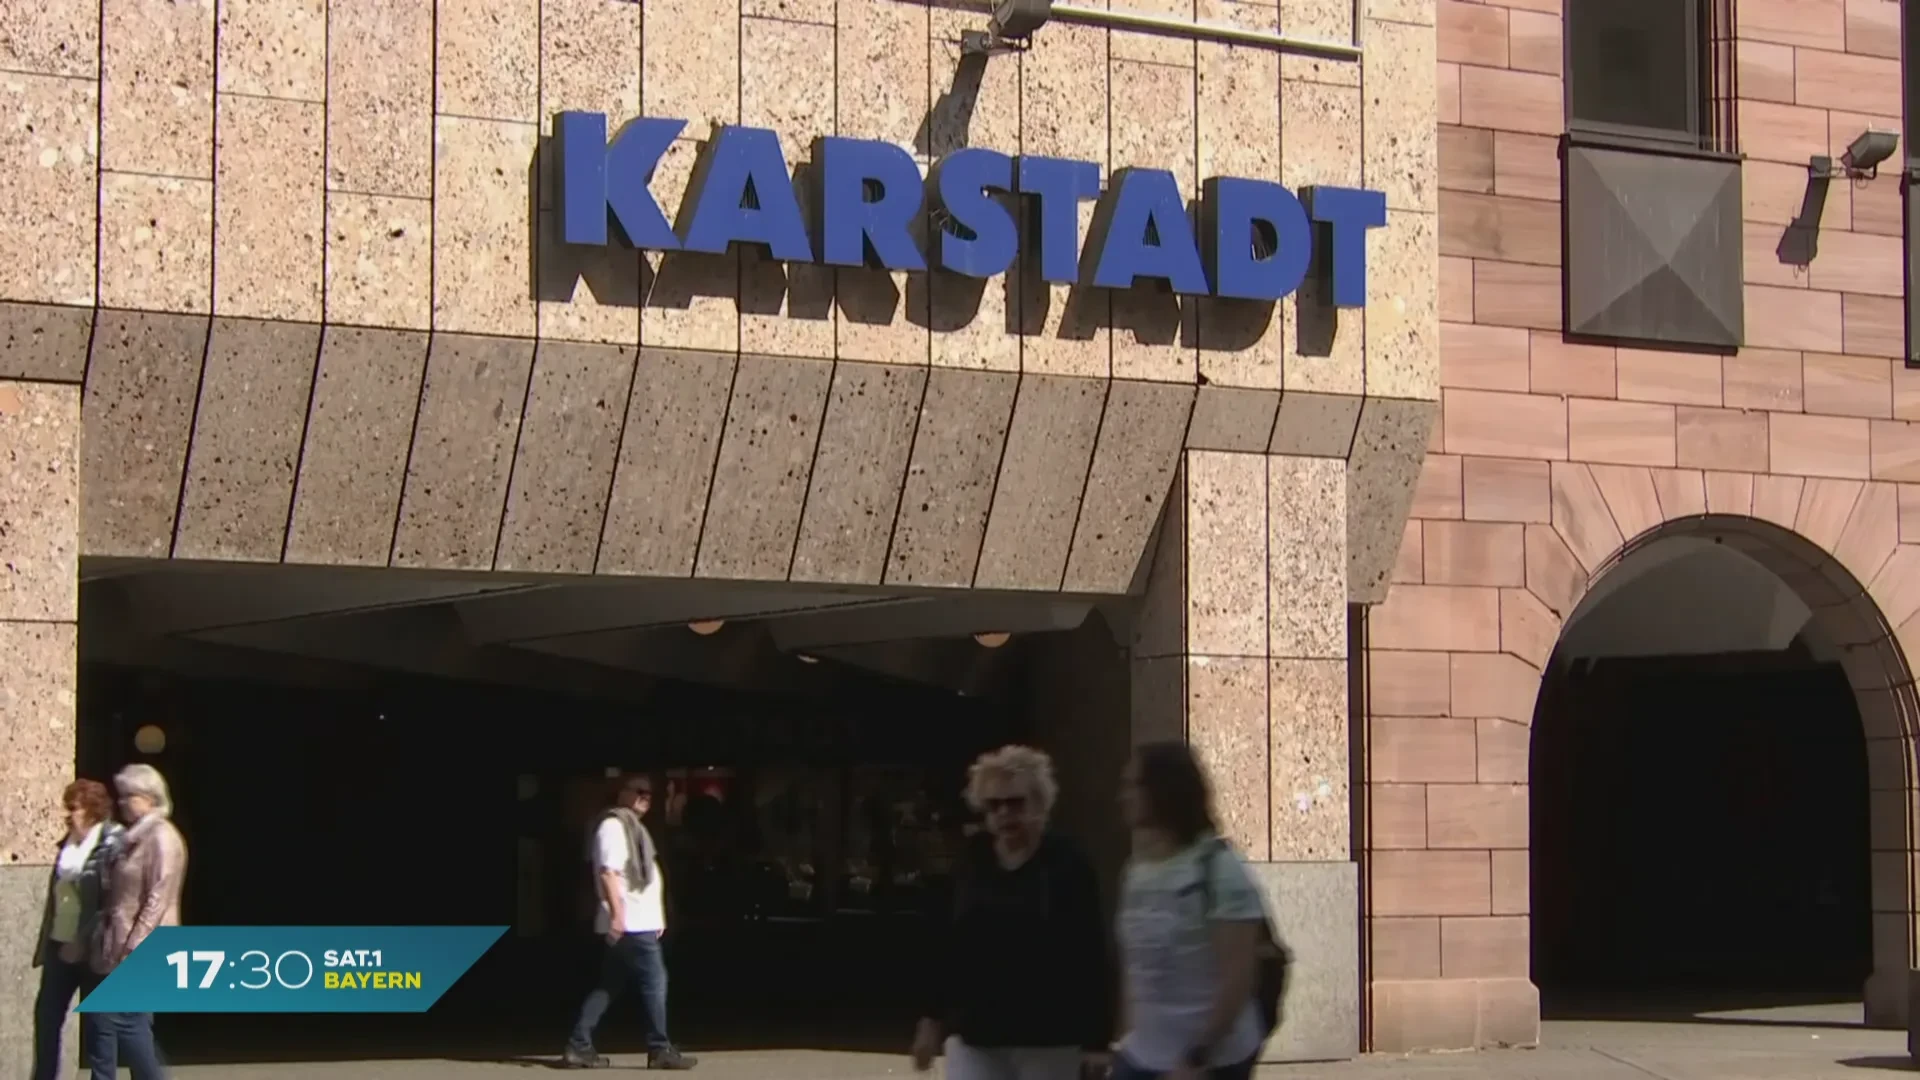 Bavaria's city centers without department stores: Is this the future?